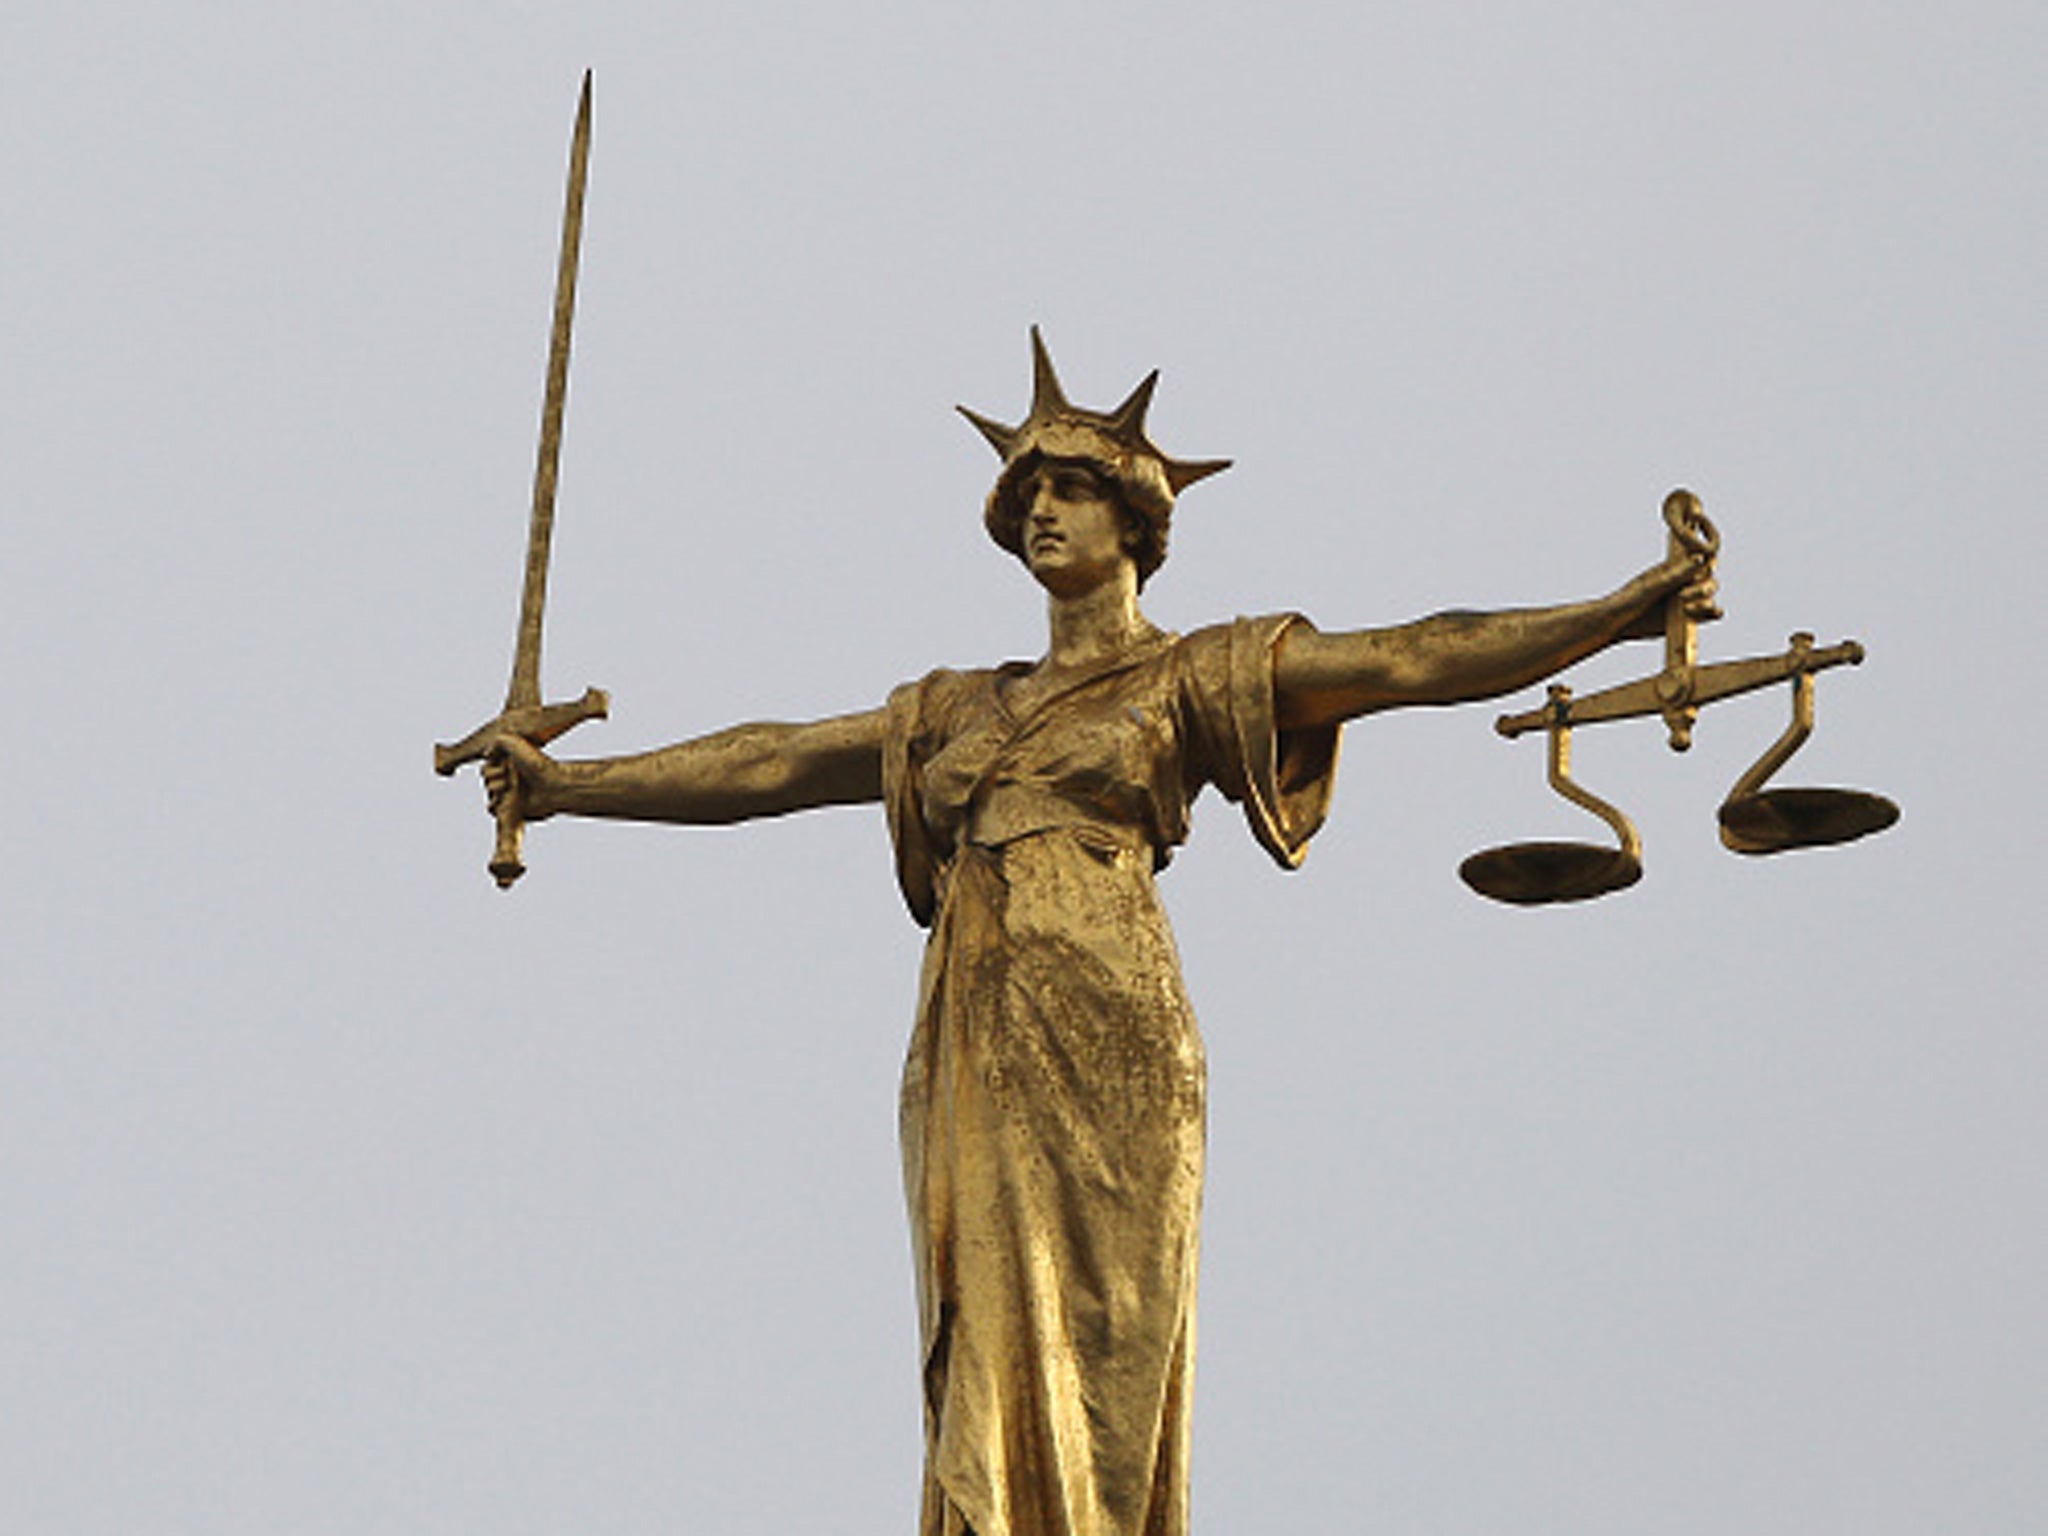 A statue of the scales of justice stands above the Old Bailey